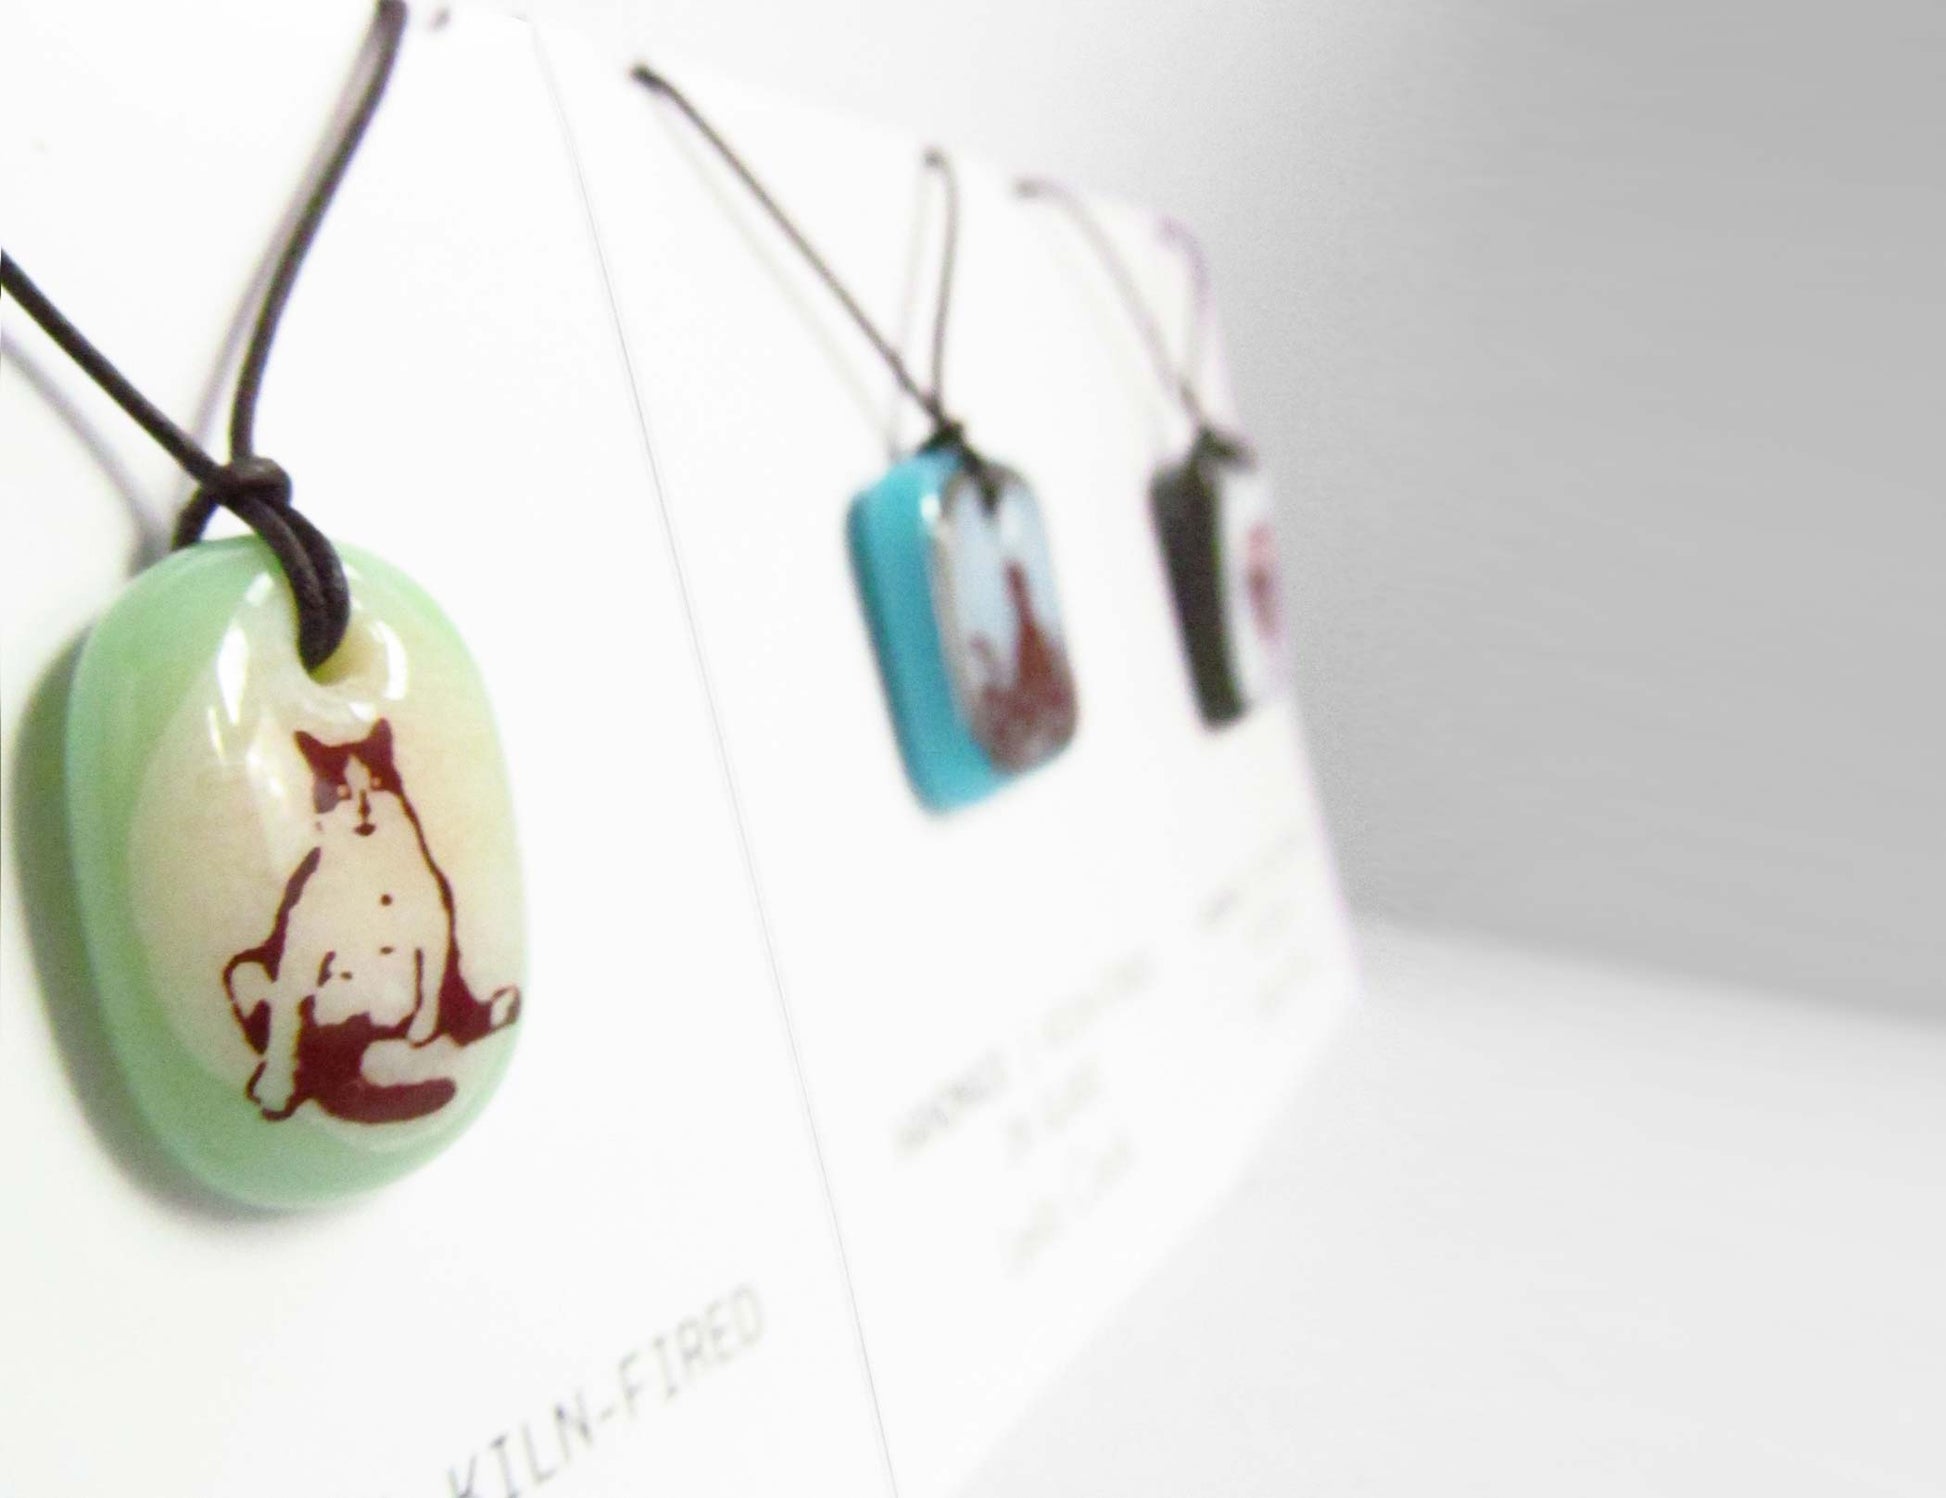 Handmade ginko tree necklaces by Leila Cools. 